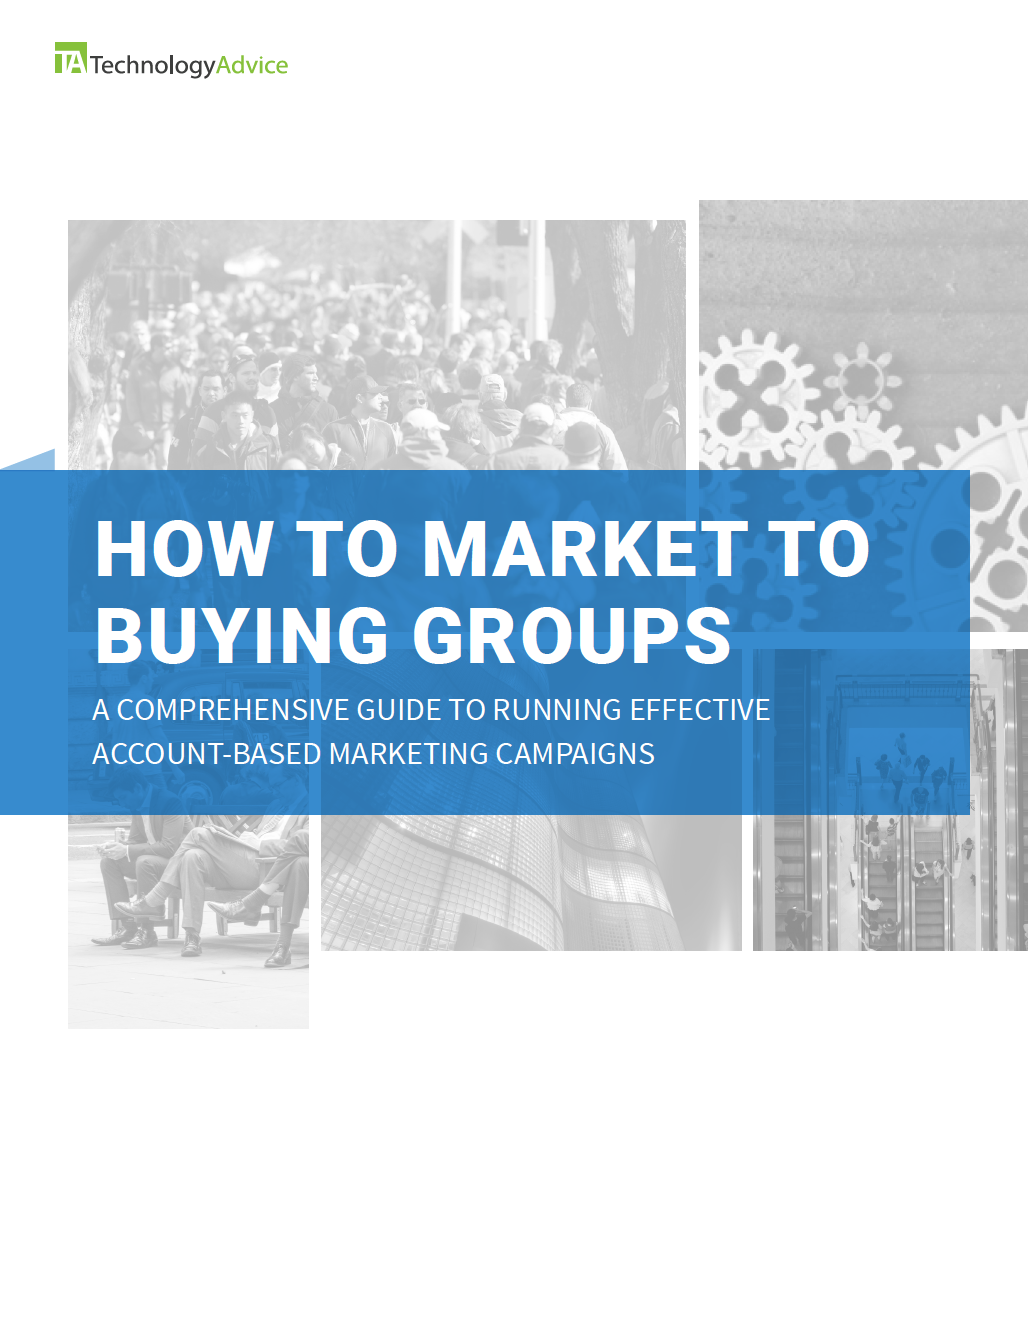 TechnologyAdvice Research Guide: How to Market to Buying Groups